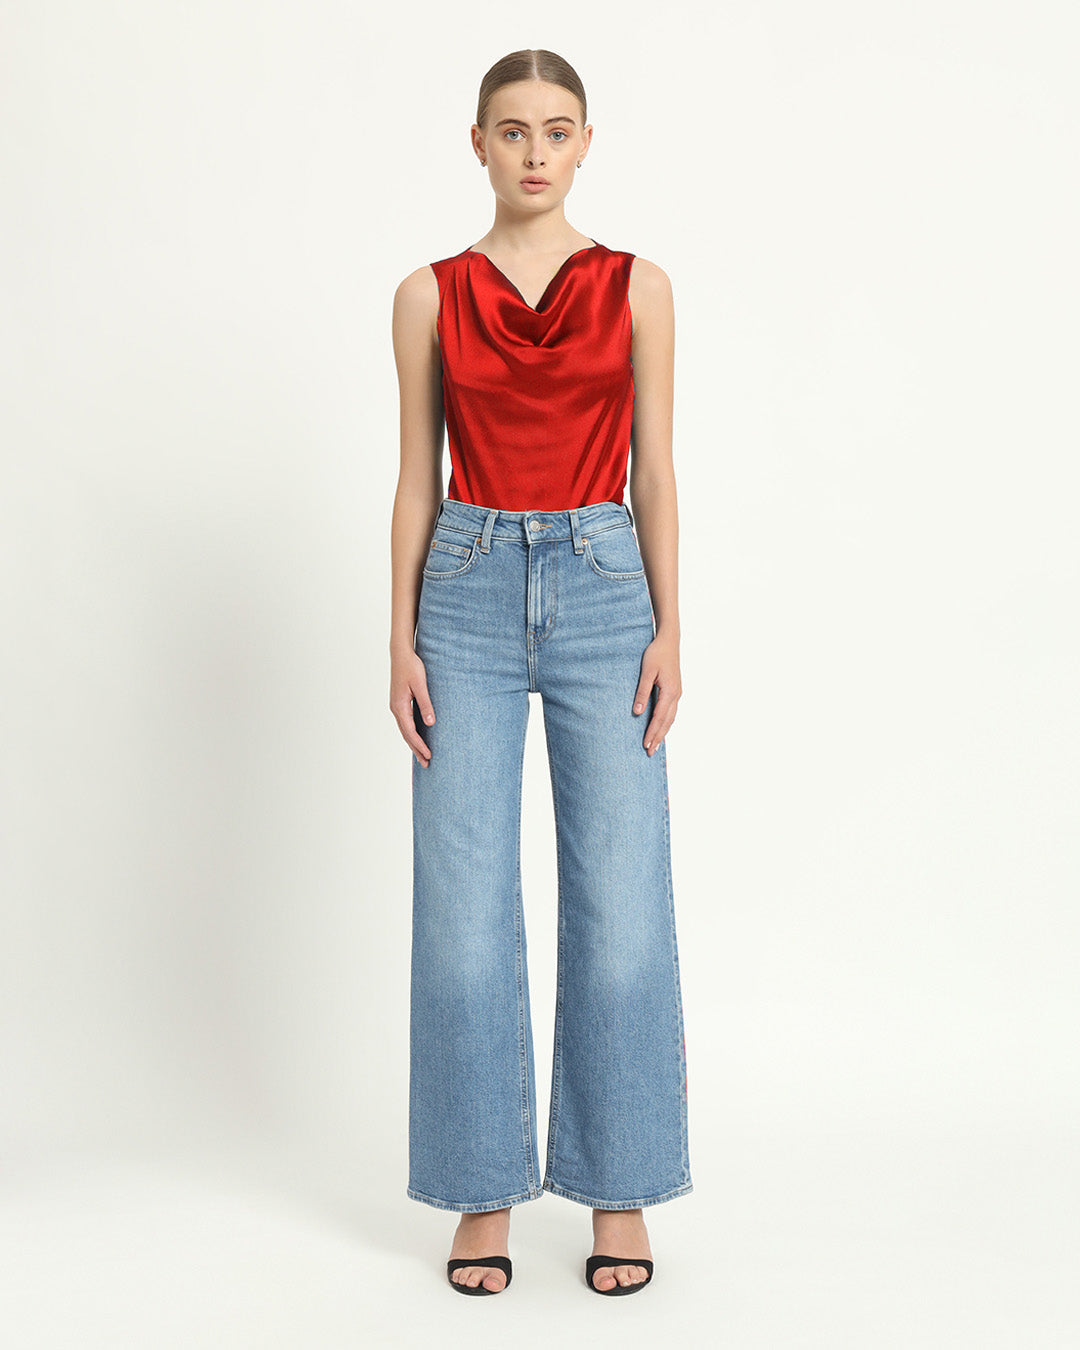 Satin Drapped Effect Scarlet Red Top